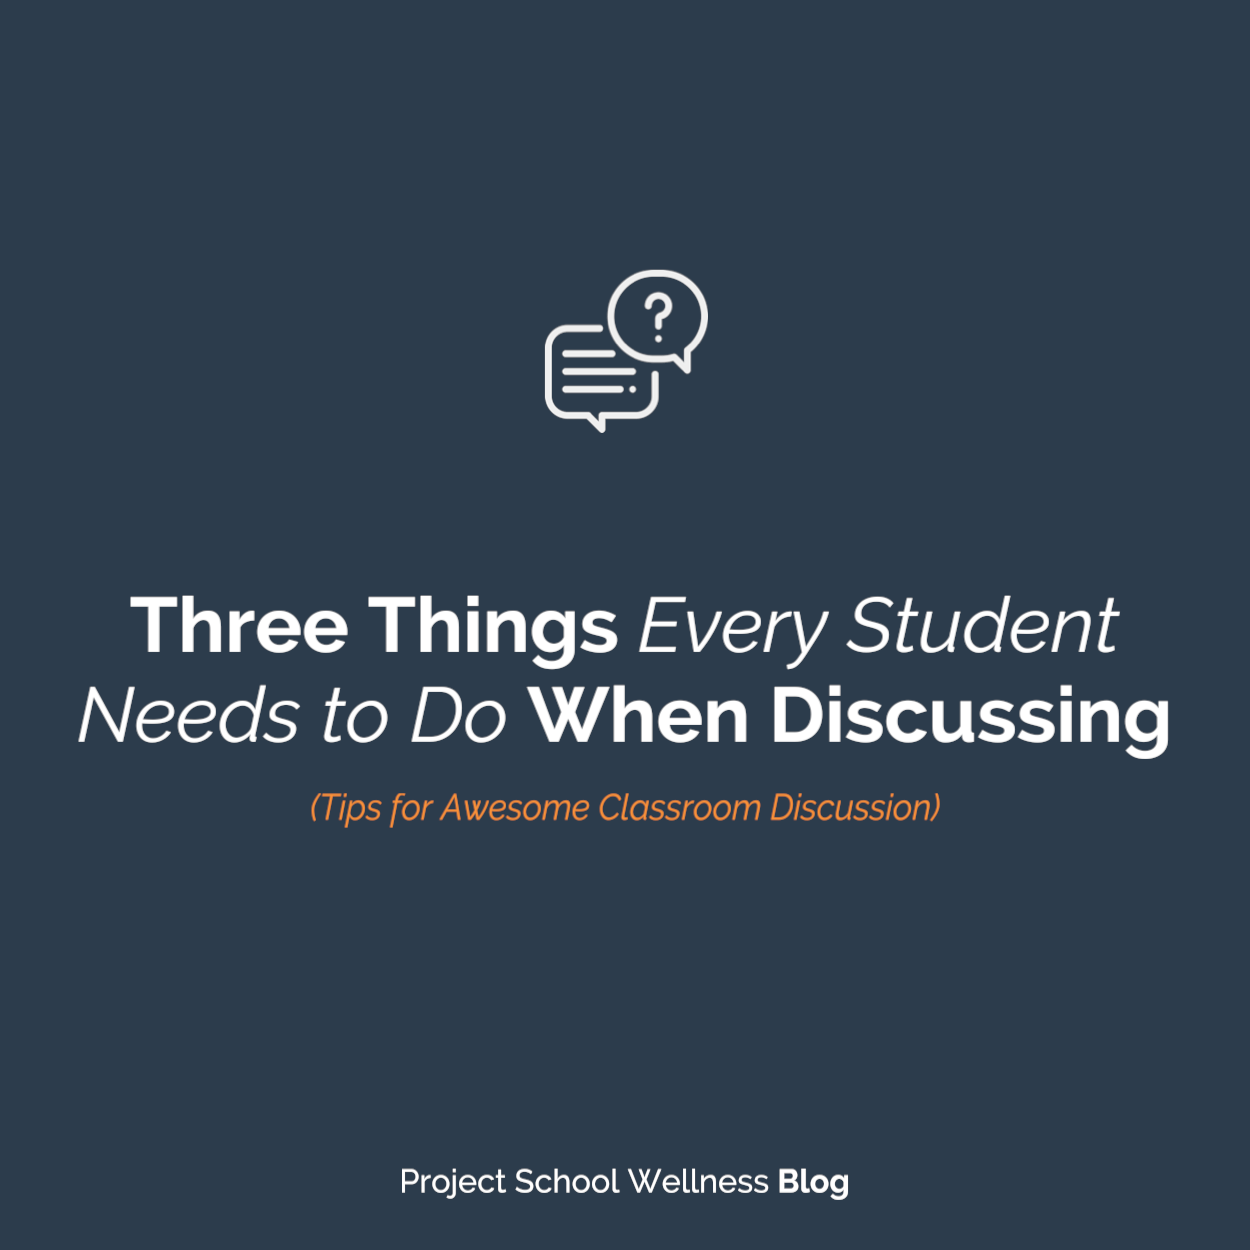 PSW Blog - Three Things Every Student Needs to Do When Disucssing